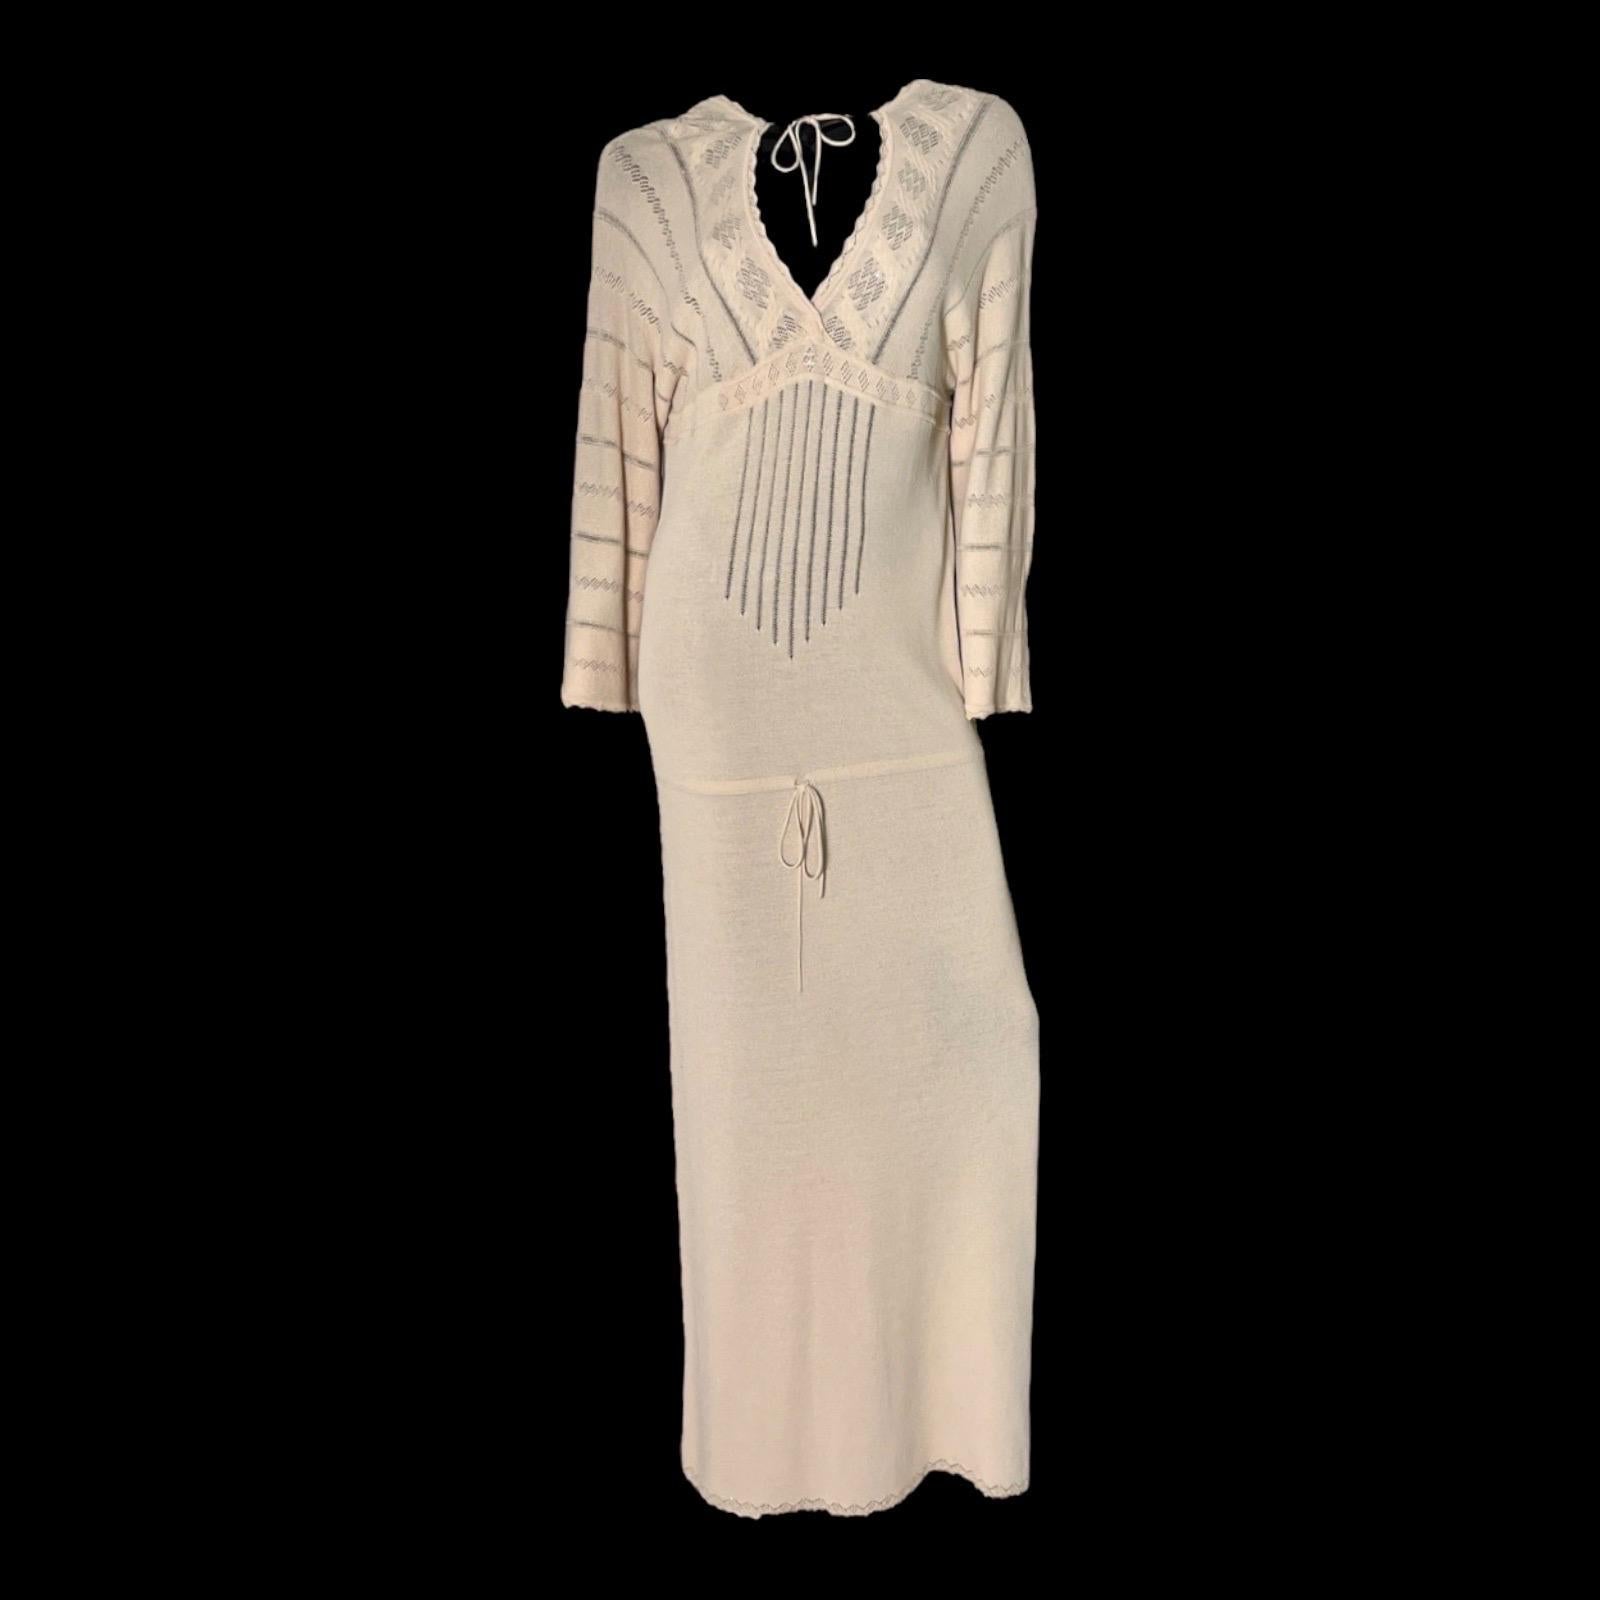 Stunning CHANEL maxi kaftan tunic dress
Knitted with beautiful details
CC logo plate in pink-gold color in front
So versatile - Wear it over your favourite bikini or swimsuit for a cool summer look or dress up for a night out
V-neck with adjustable